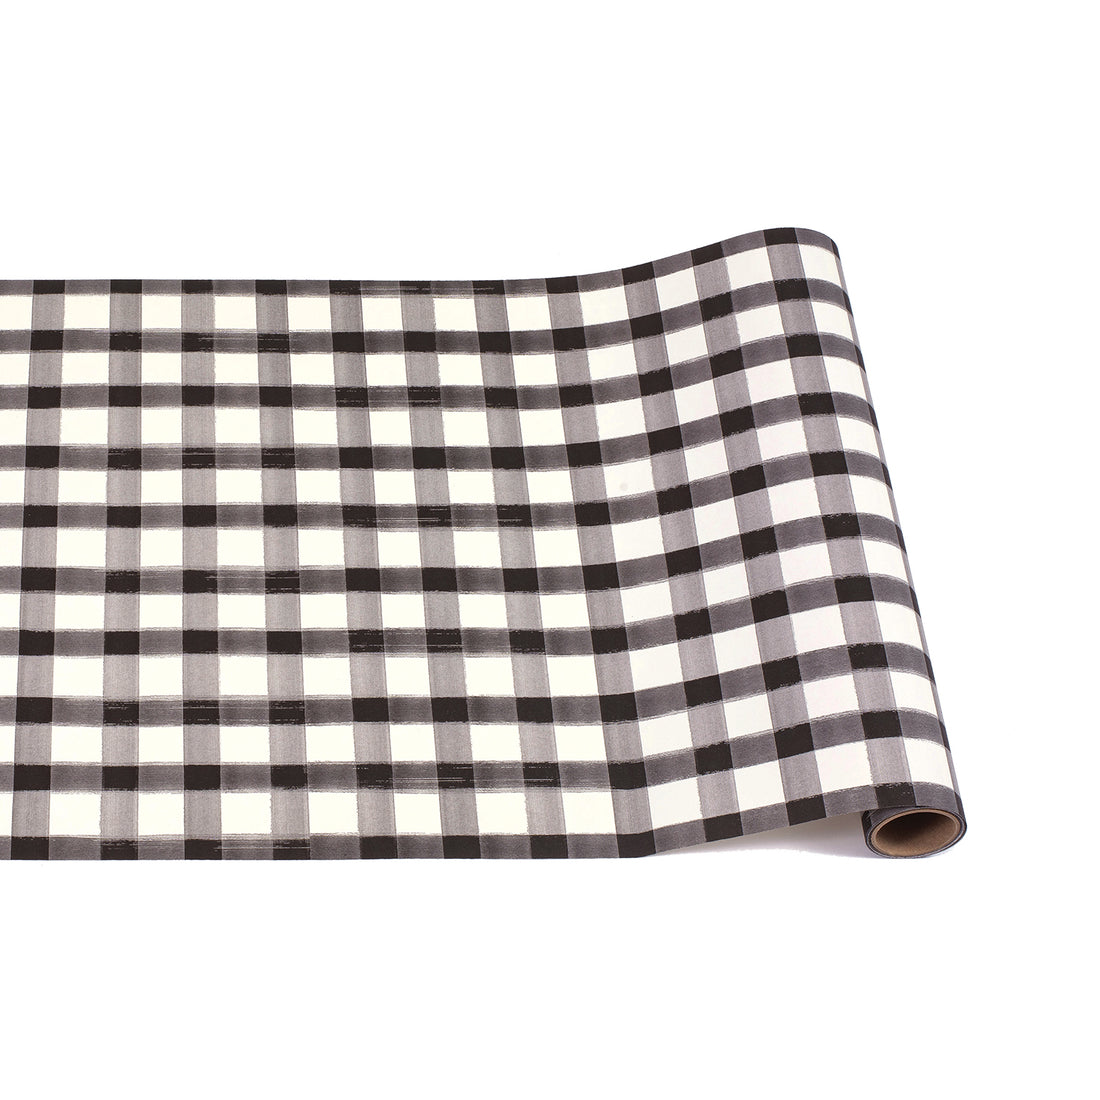 Paper roll with a painted gingham grid check pattern made of gray lines intersecting at black squares, on a white background.